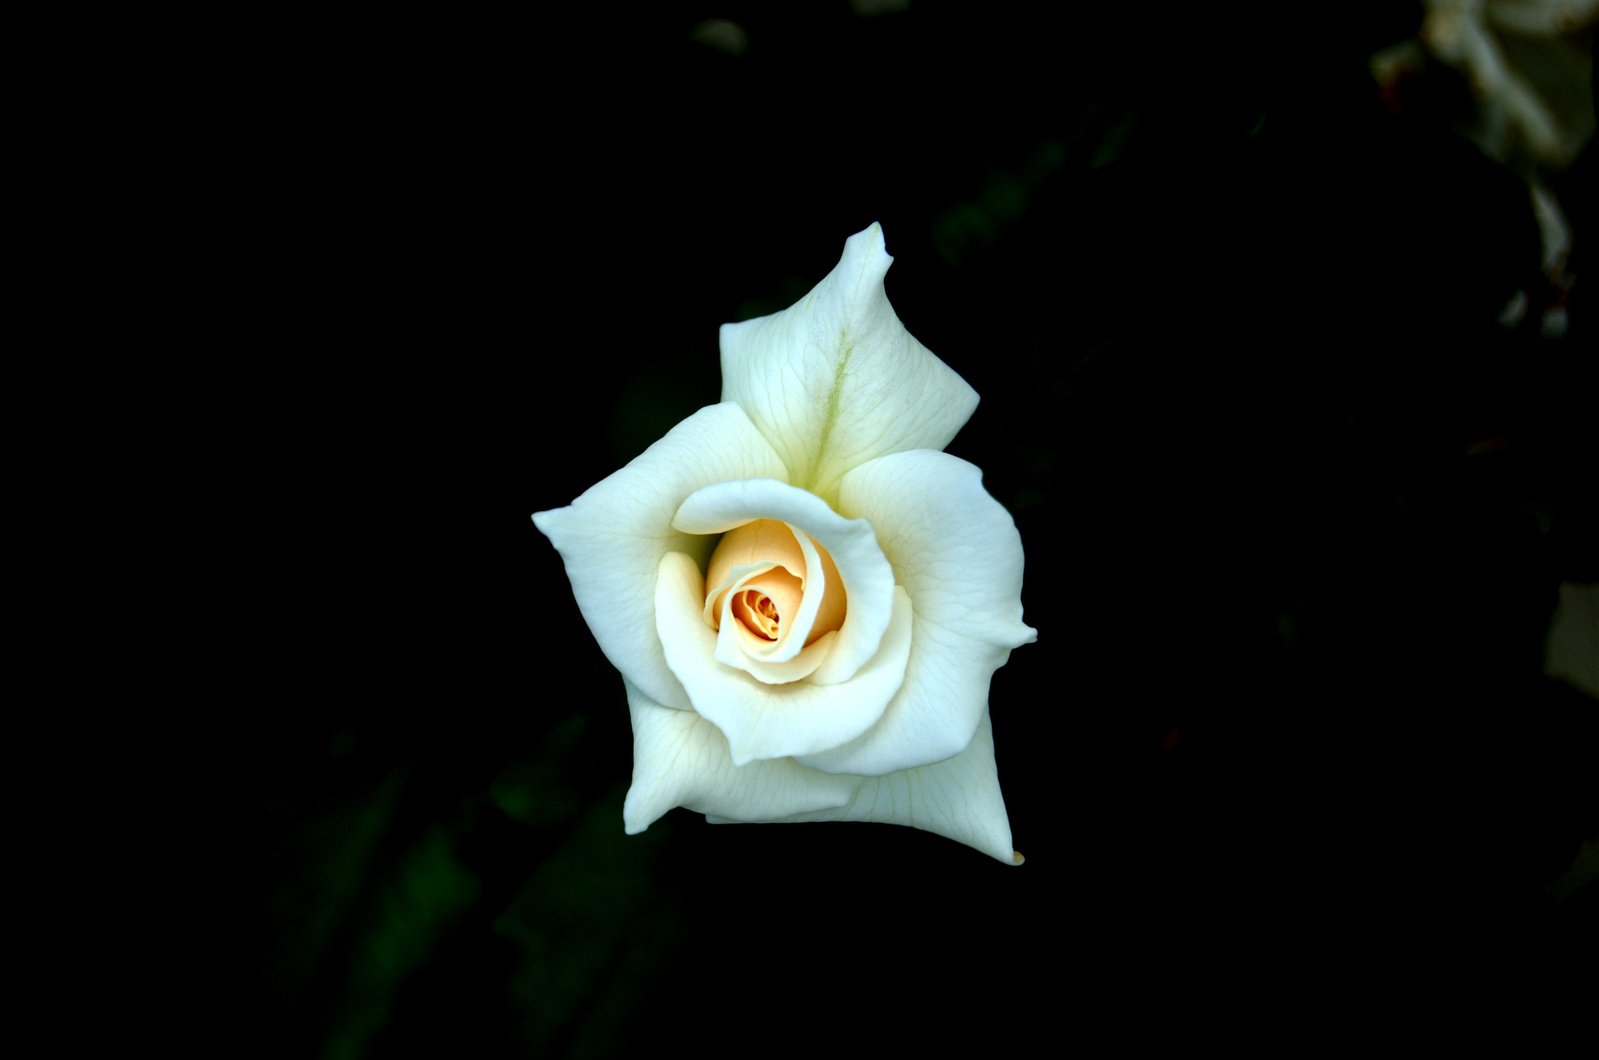 white flower with brown center in night, close up